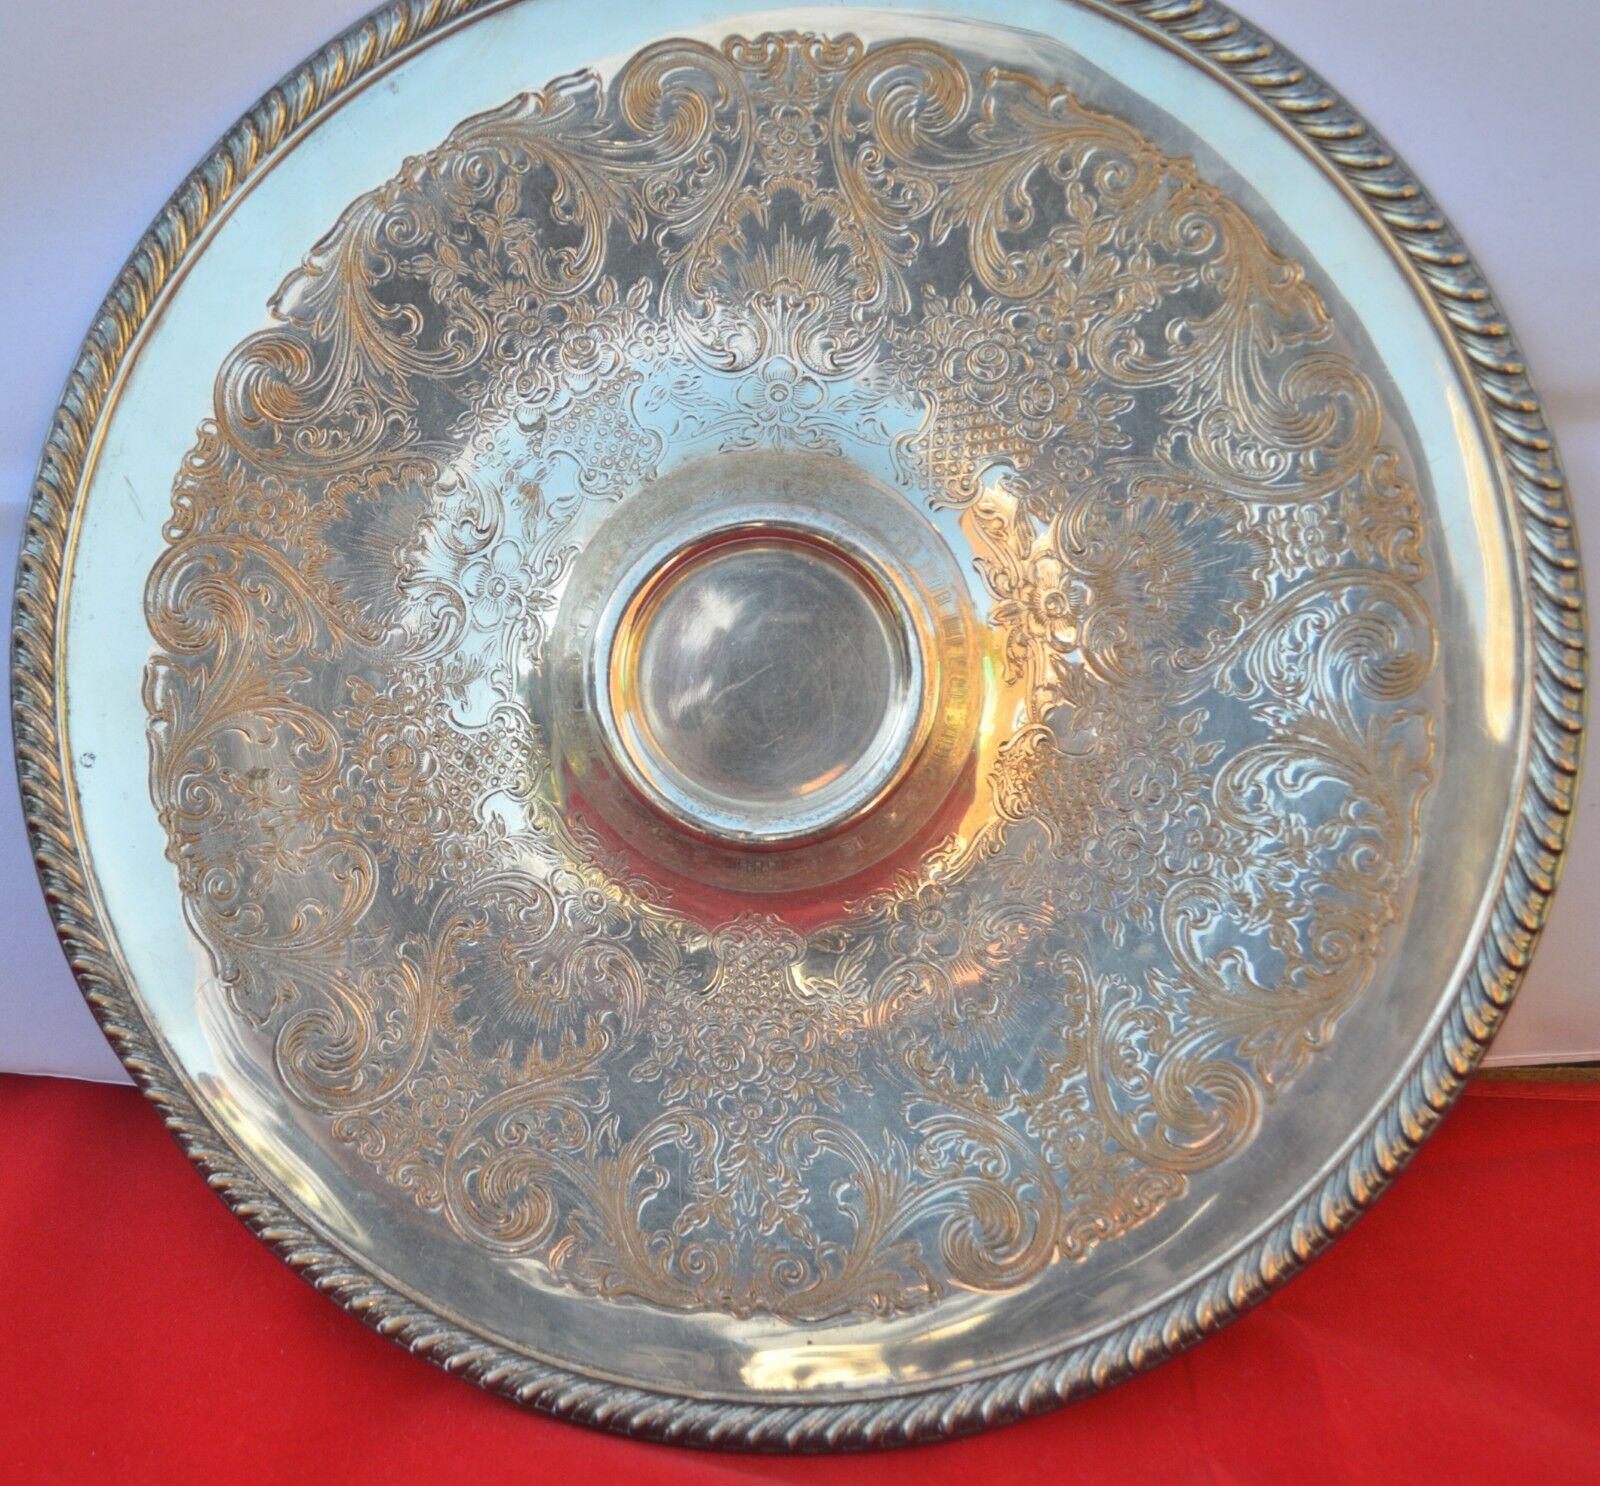 VINTAGE WM ROGERS 866 SILVER-PLATE ETCHED PATTERN SERVING TRAY - TMD167207